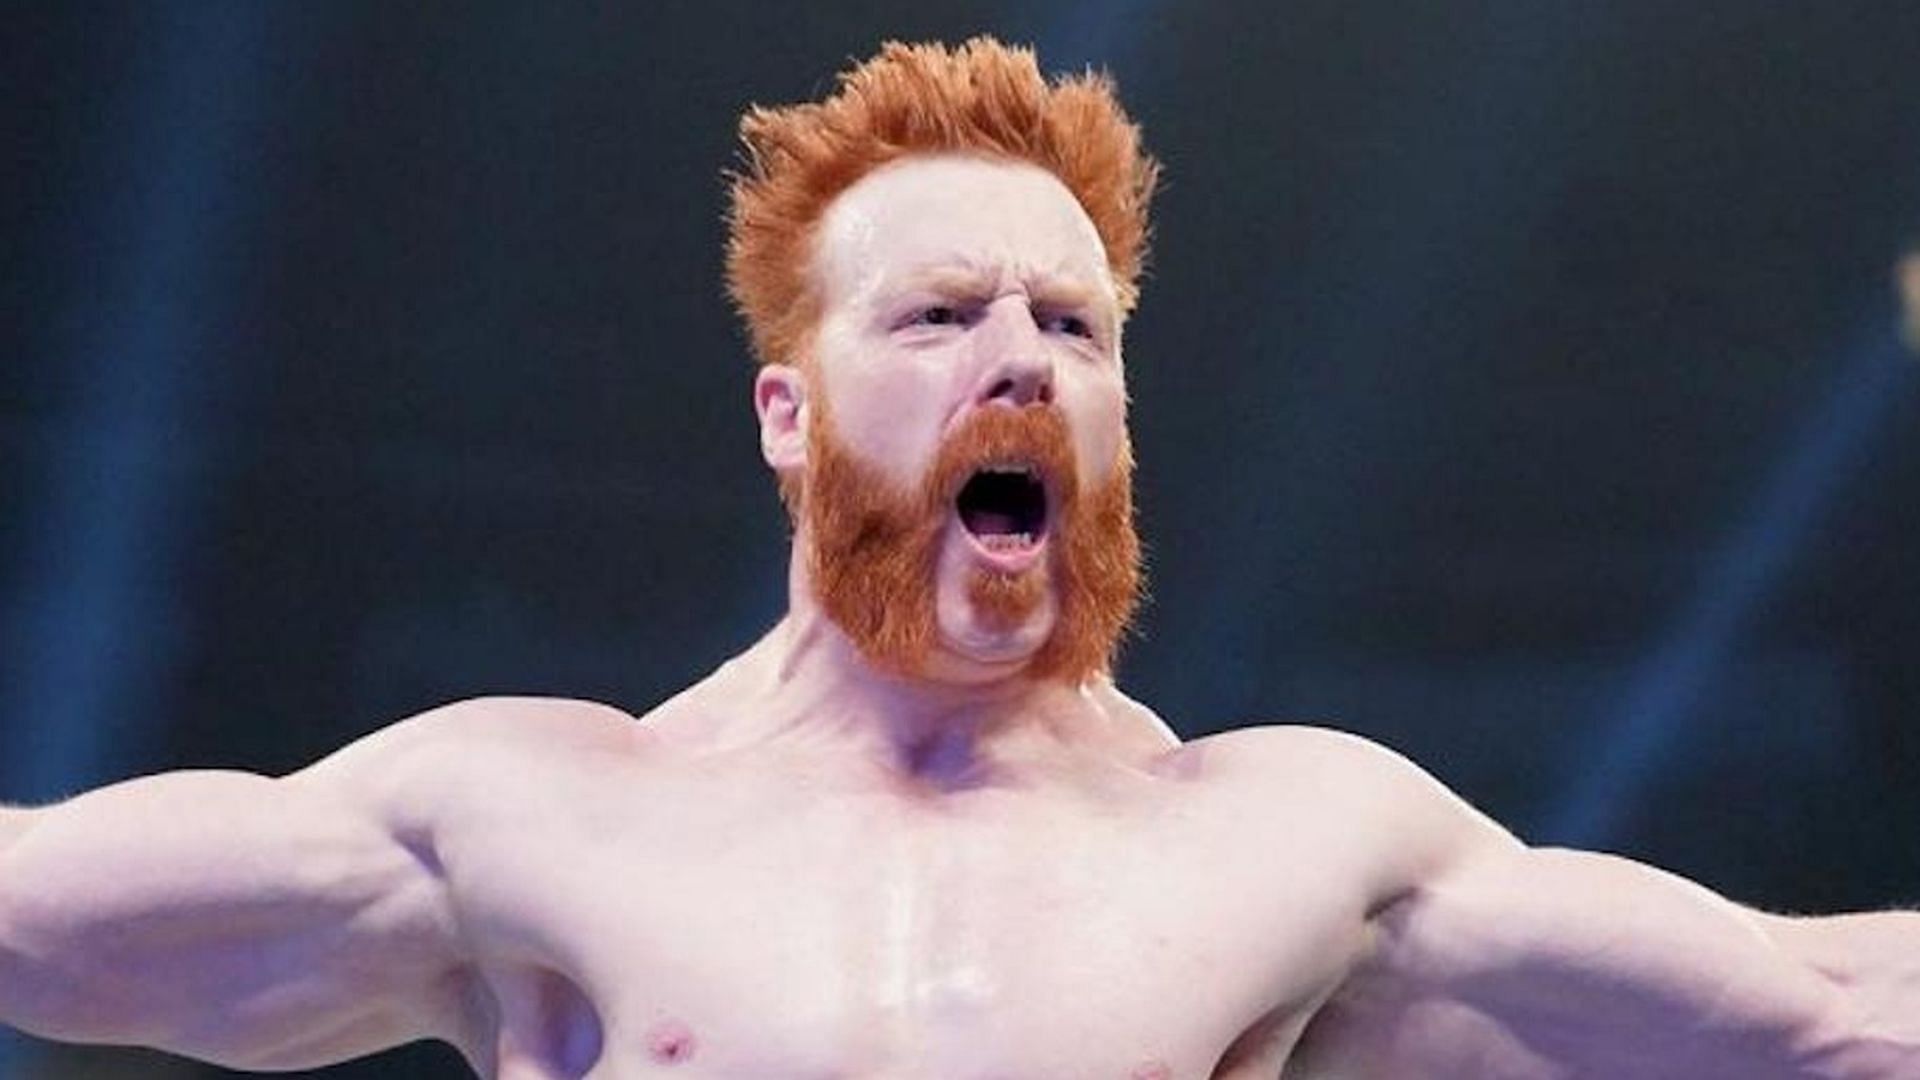 There’s only one man who should be Sheamus’ final WWE opponent